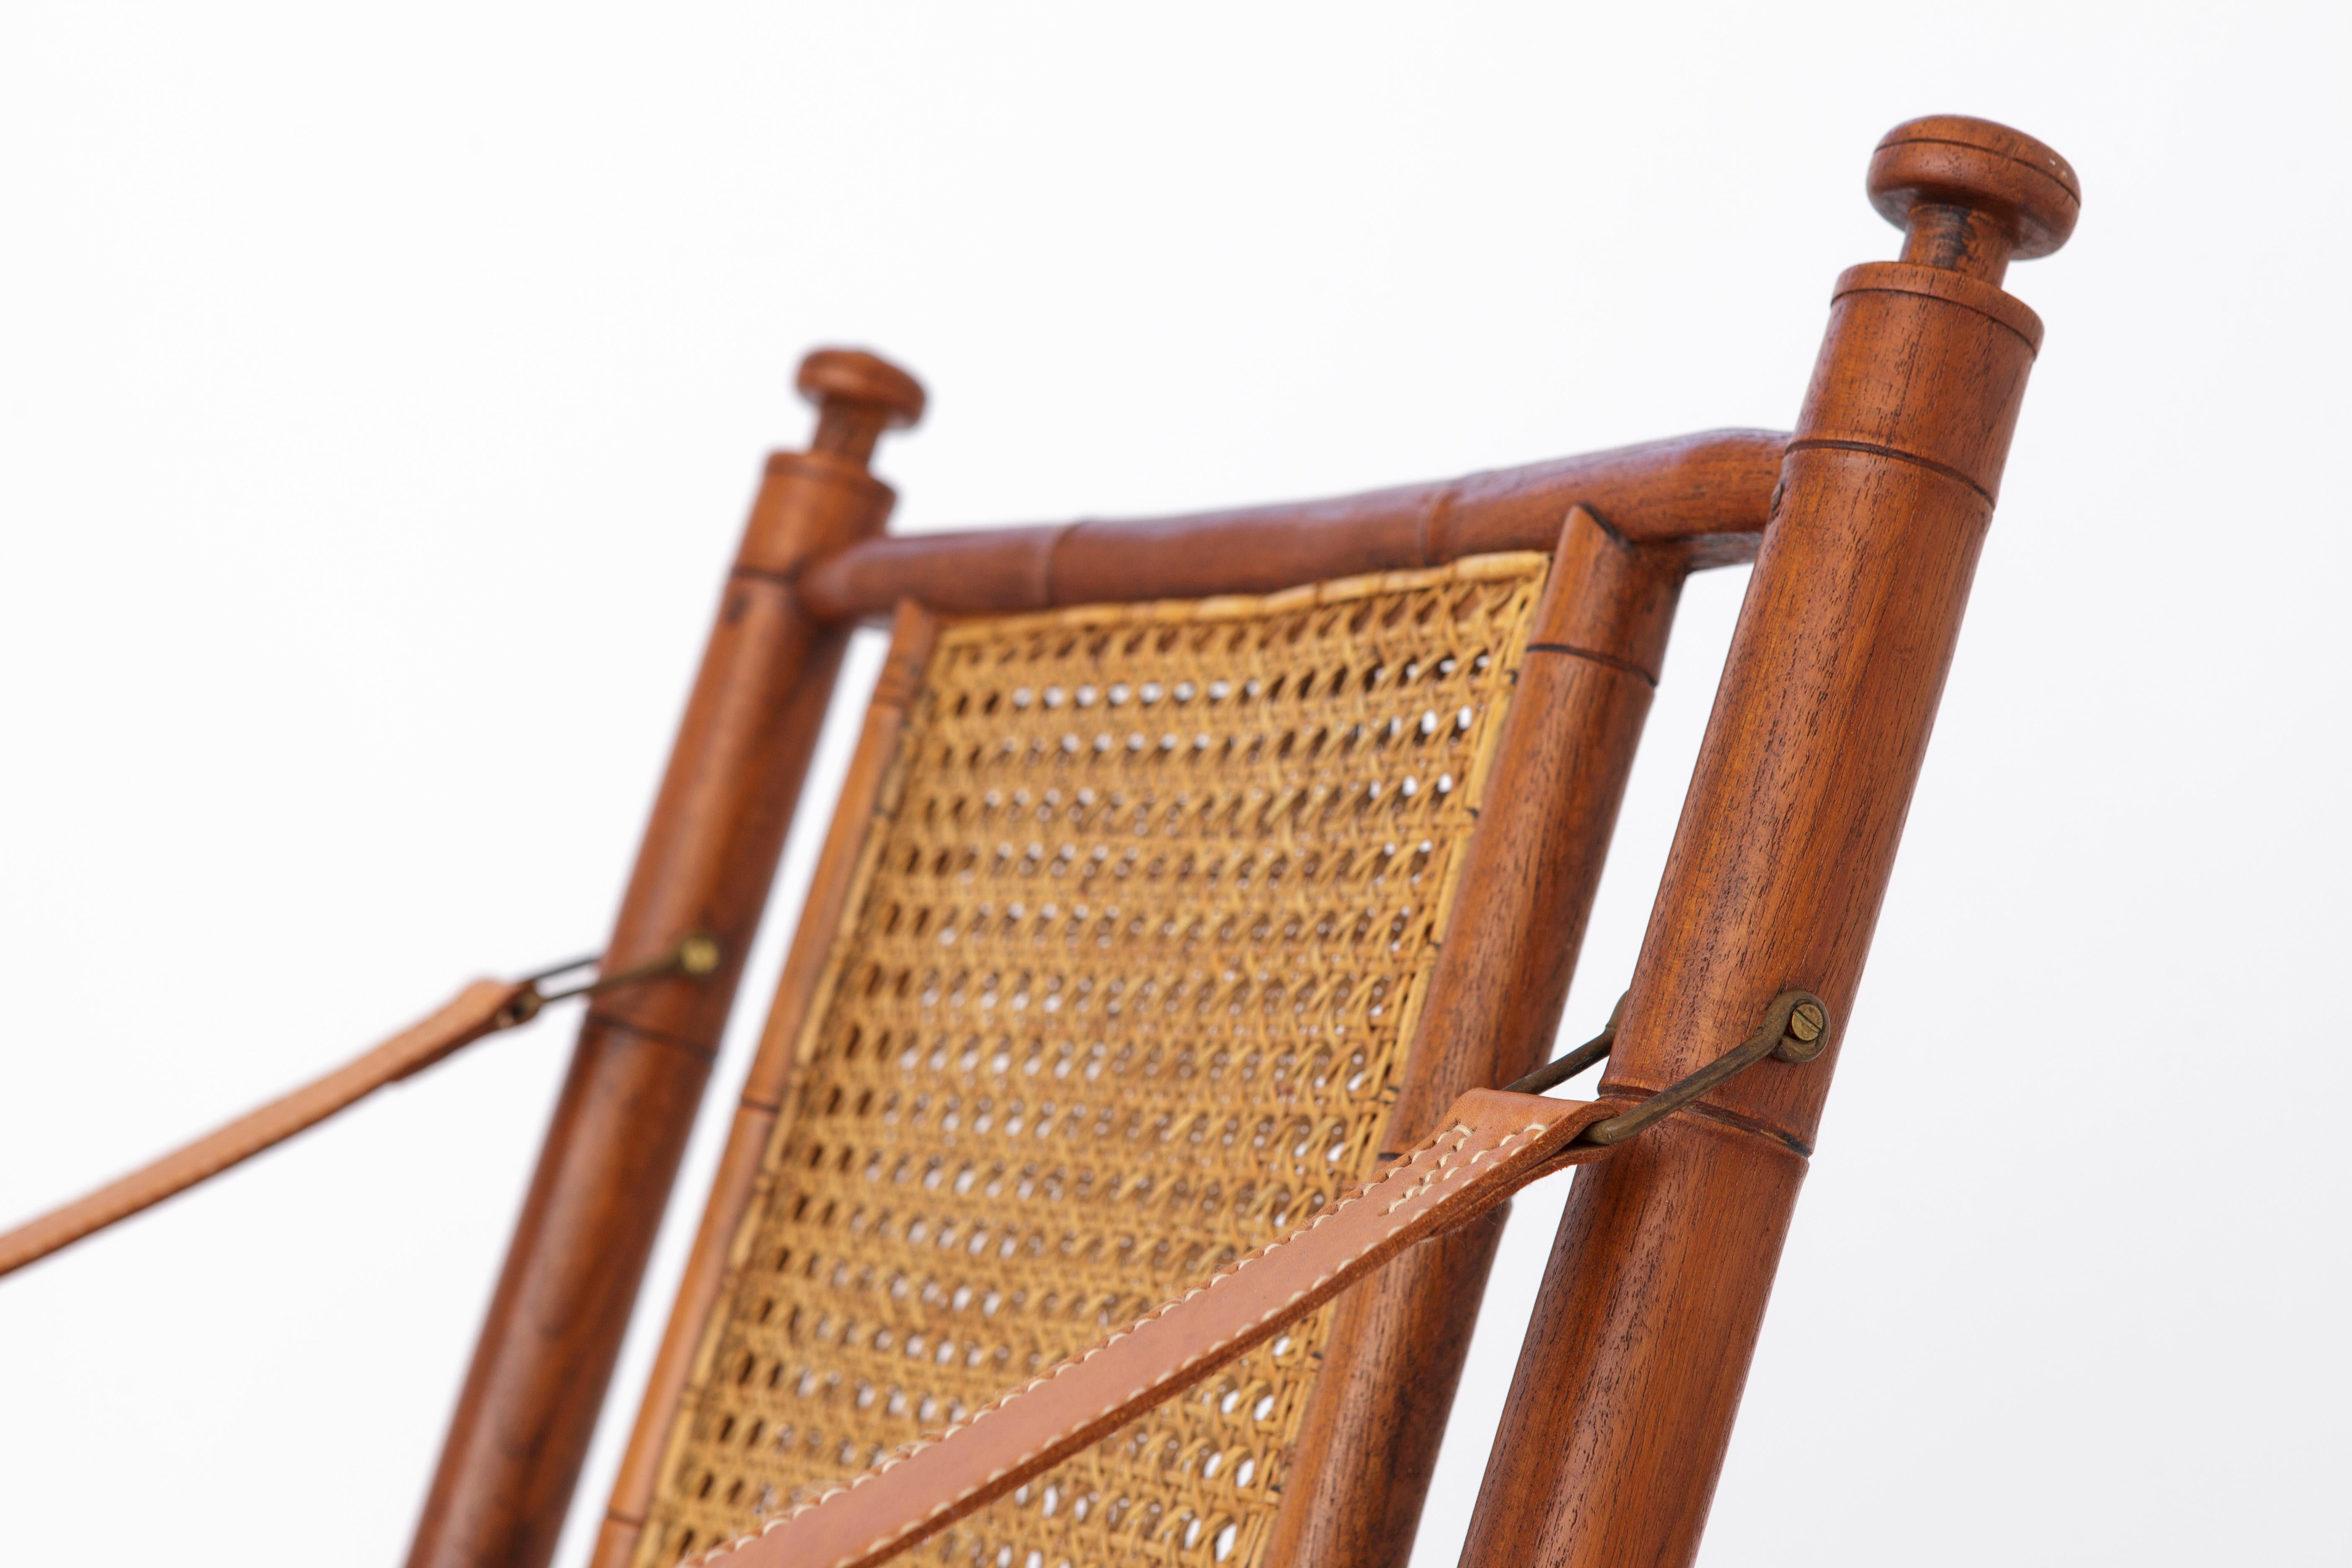 Polished Vintage Folding Chair 1960s Spain Viennese Weaving For Sale